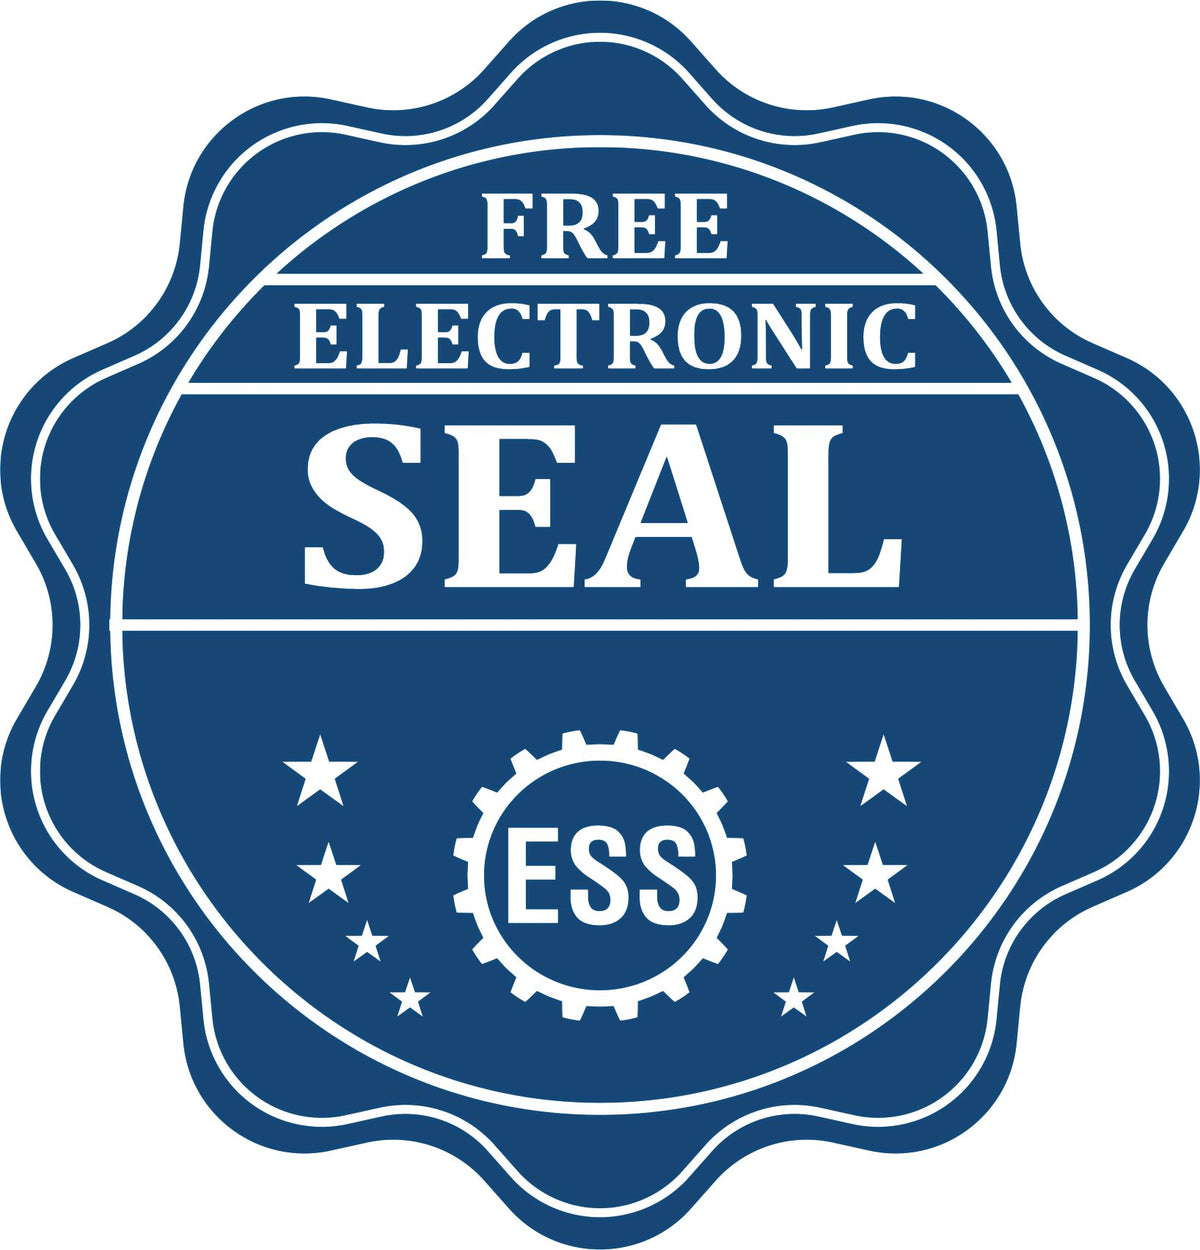 A badge showing a free electronic seal for the Kansas Geologist Desk Seal with stars and the ESS gear on the emblem.